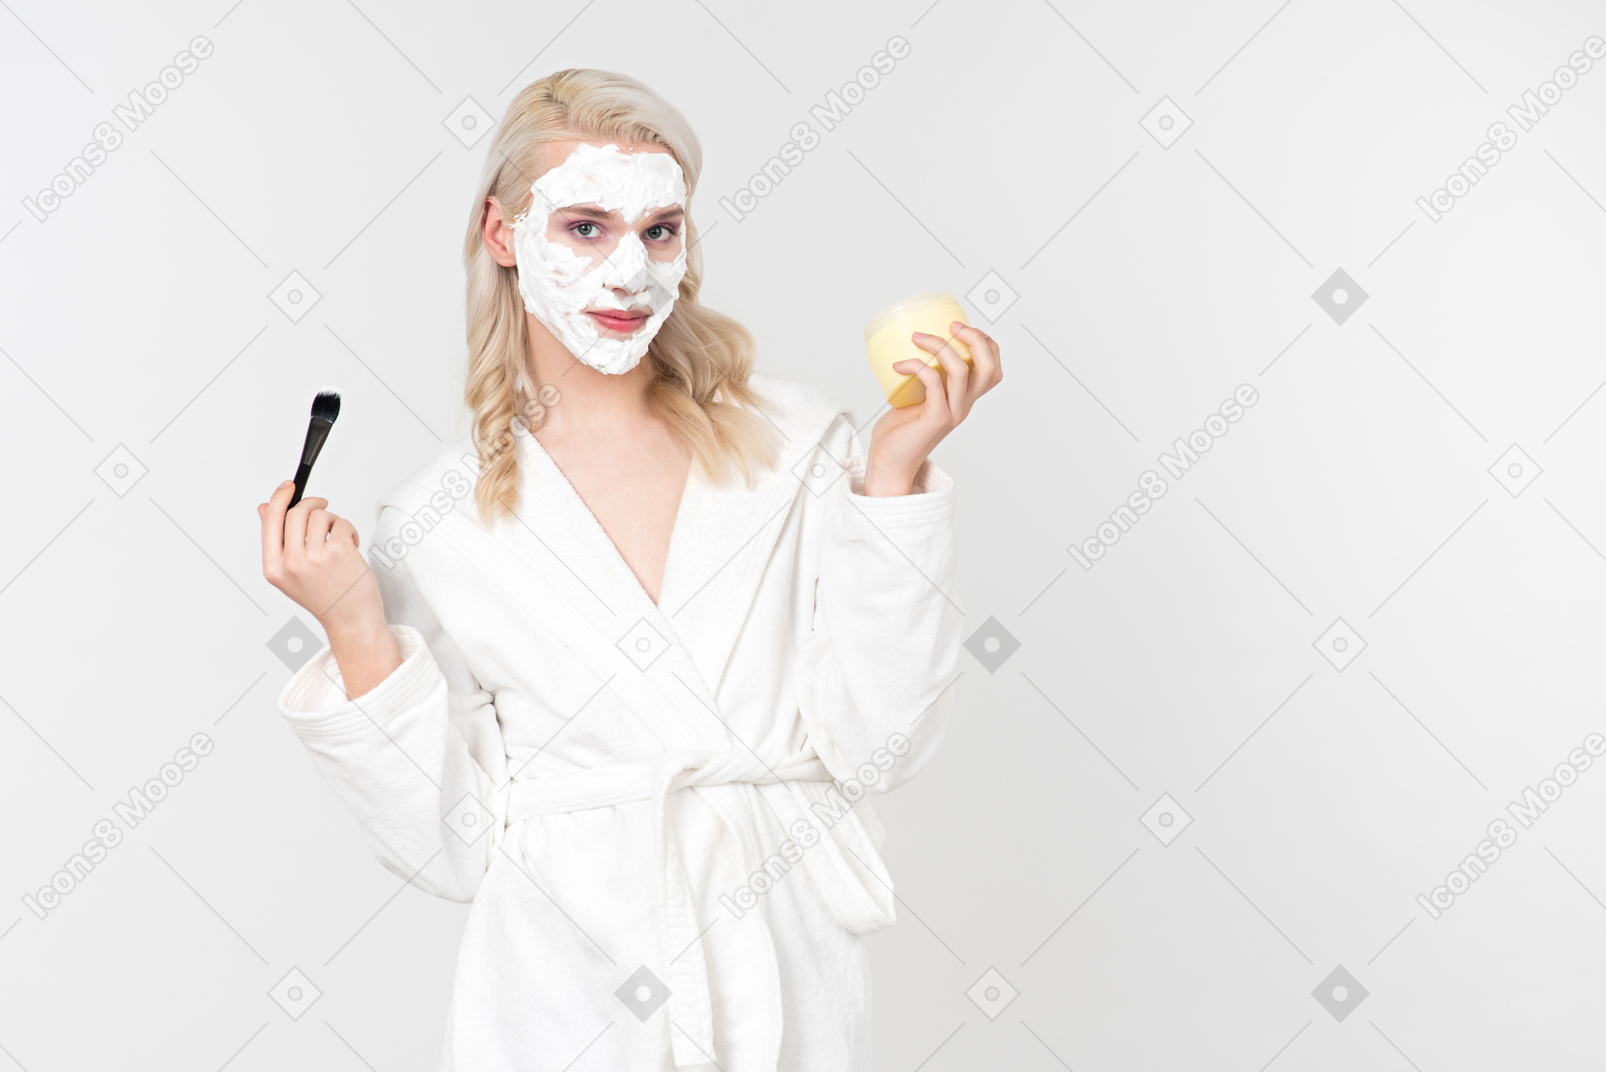 A good looking blond-haired young man in a white bathrobe, being in the process of his beauty care routine